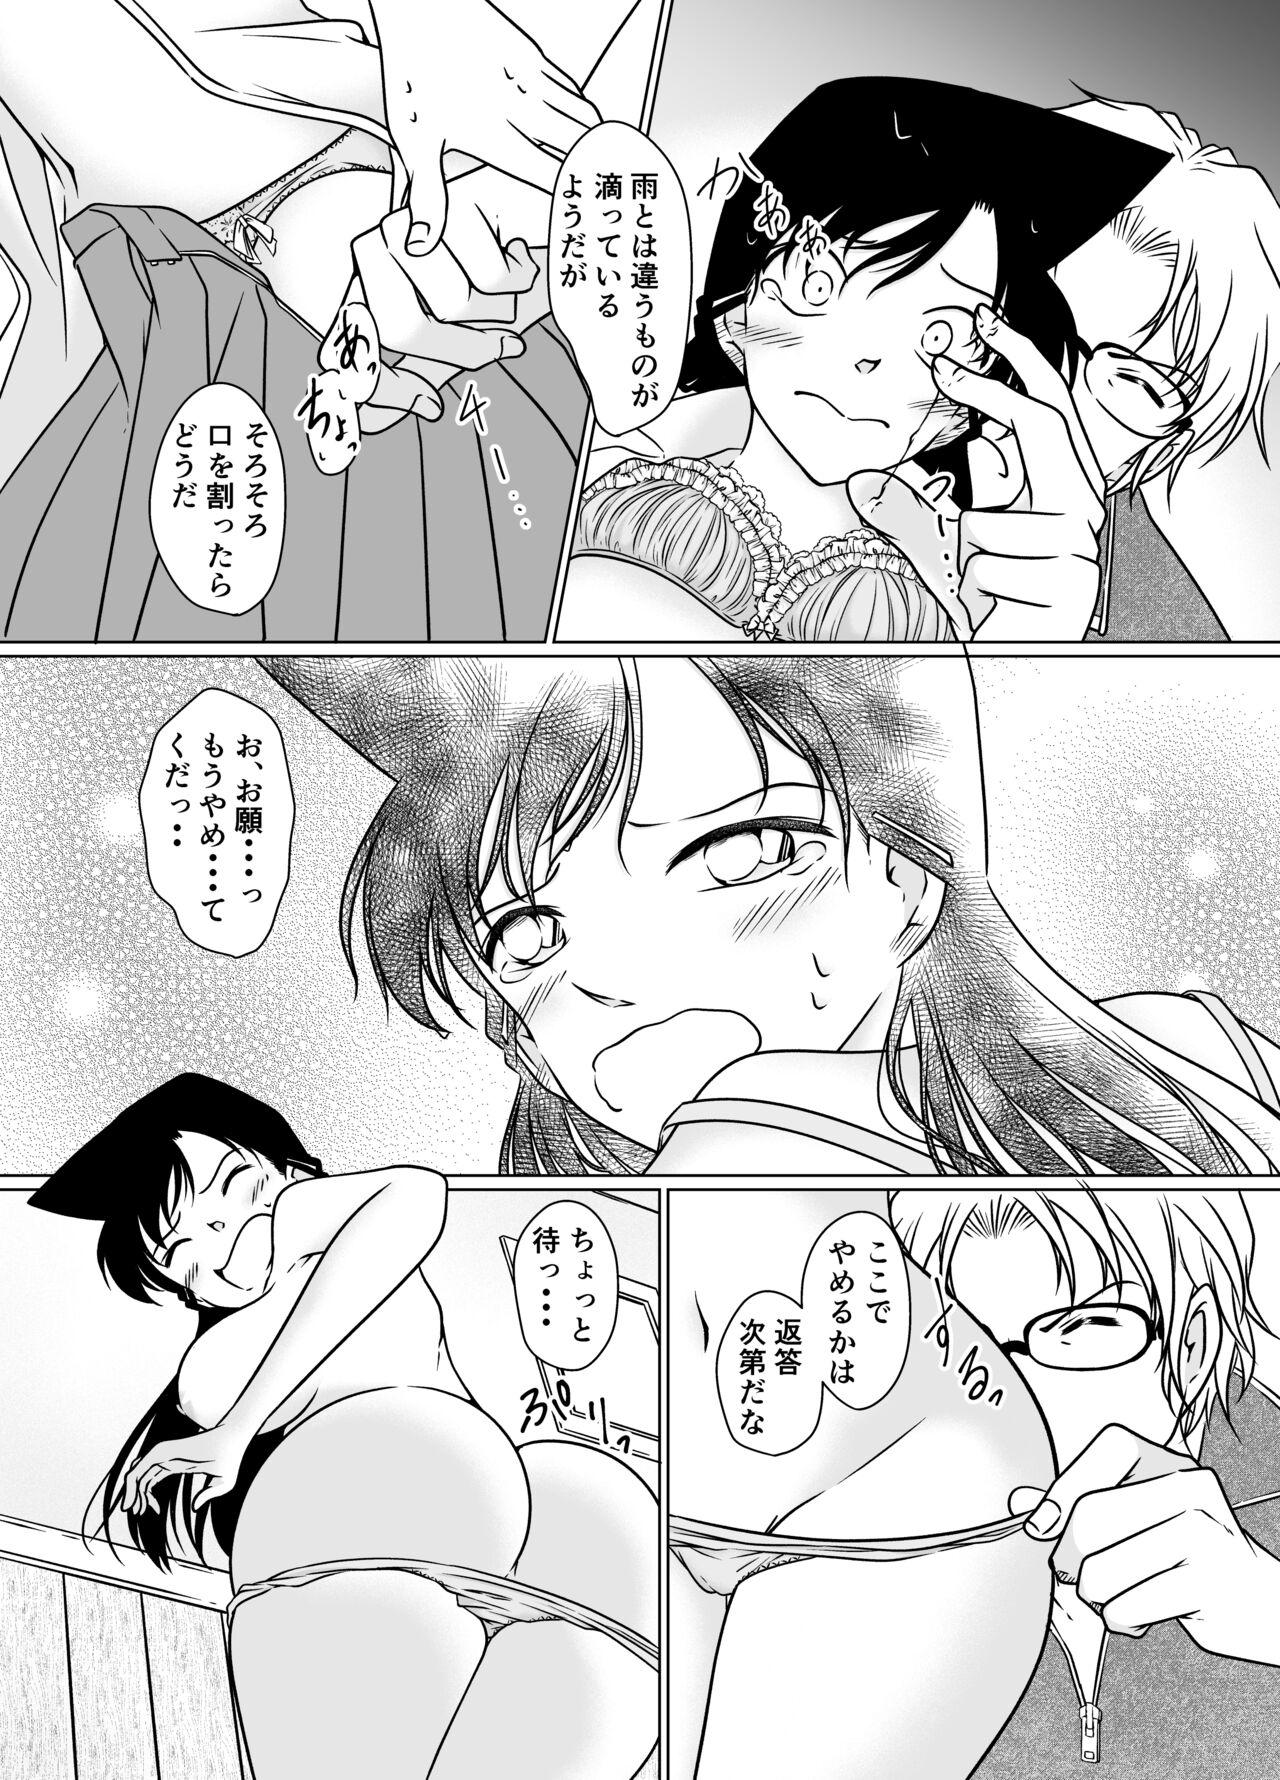 【Detective Conan】Something is wrong in the afternoon 14